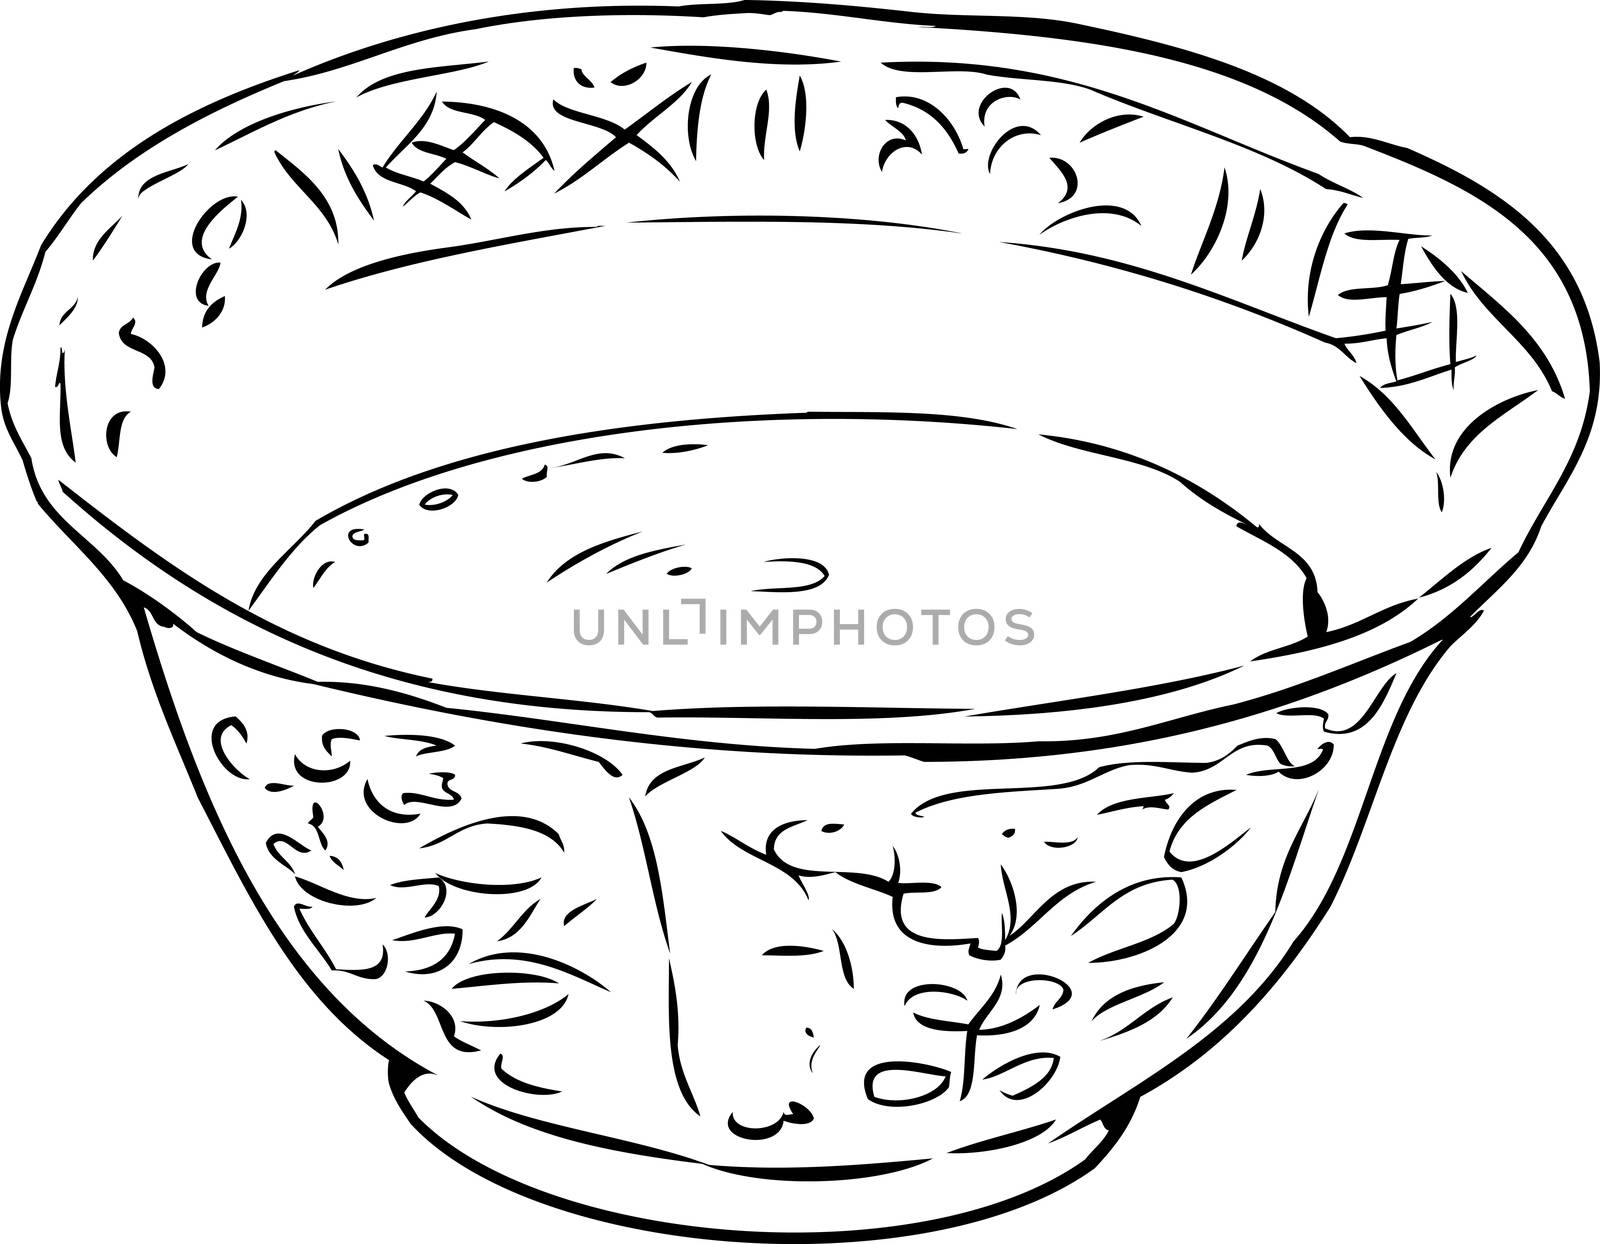 Outlined illustration of antique 18th century teacup full with tea